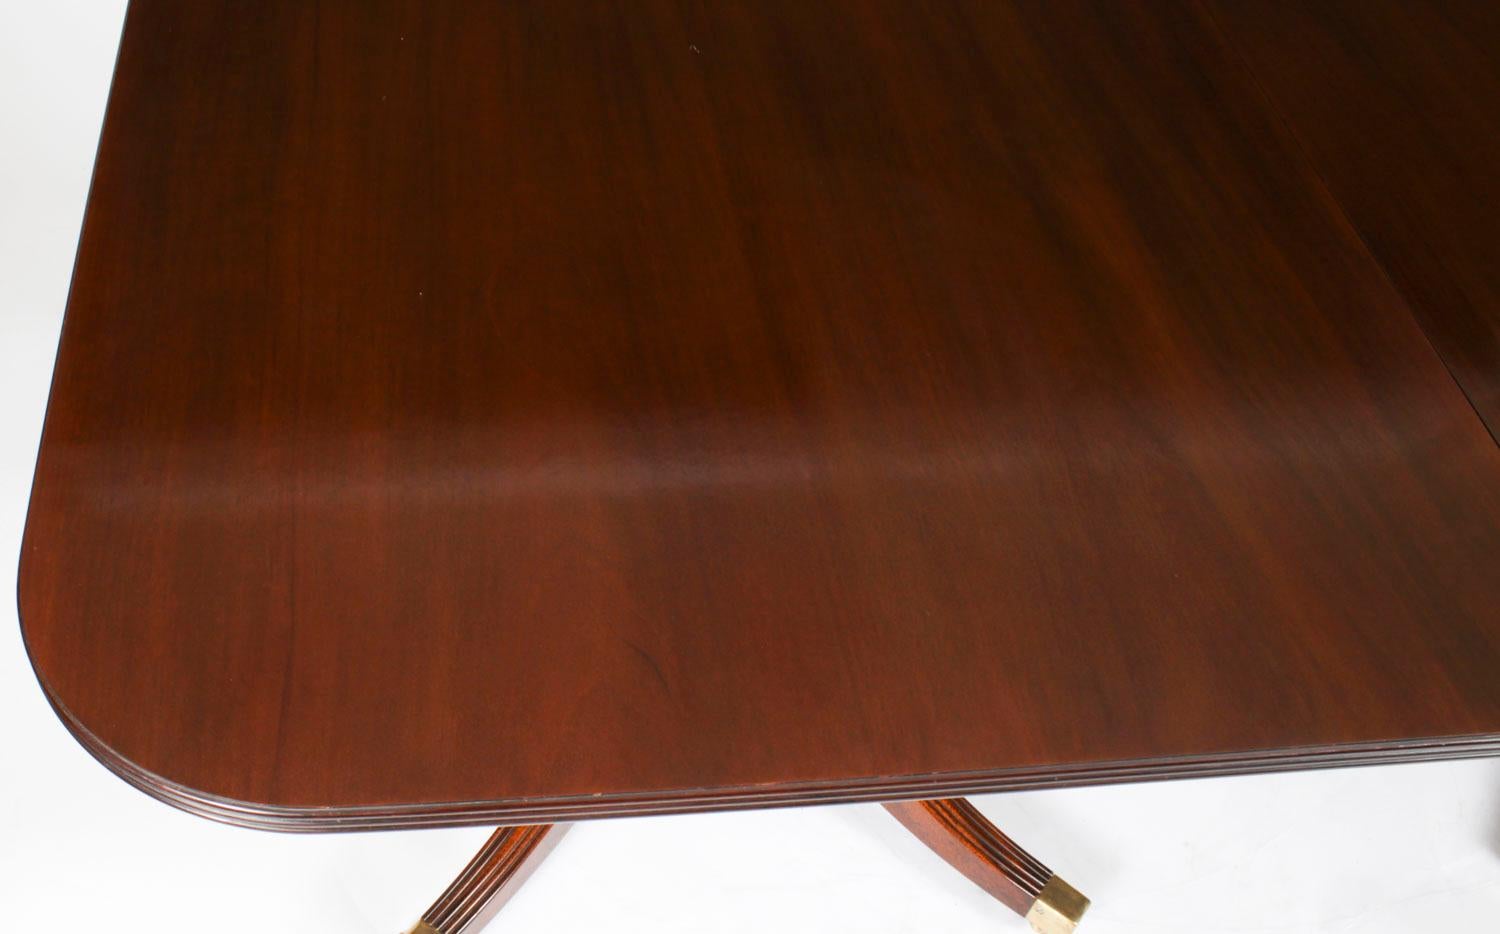 Vintage 7ft Regency Revival Dining Table William Tillman, Late 20th Century For Sale 2